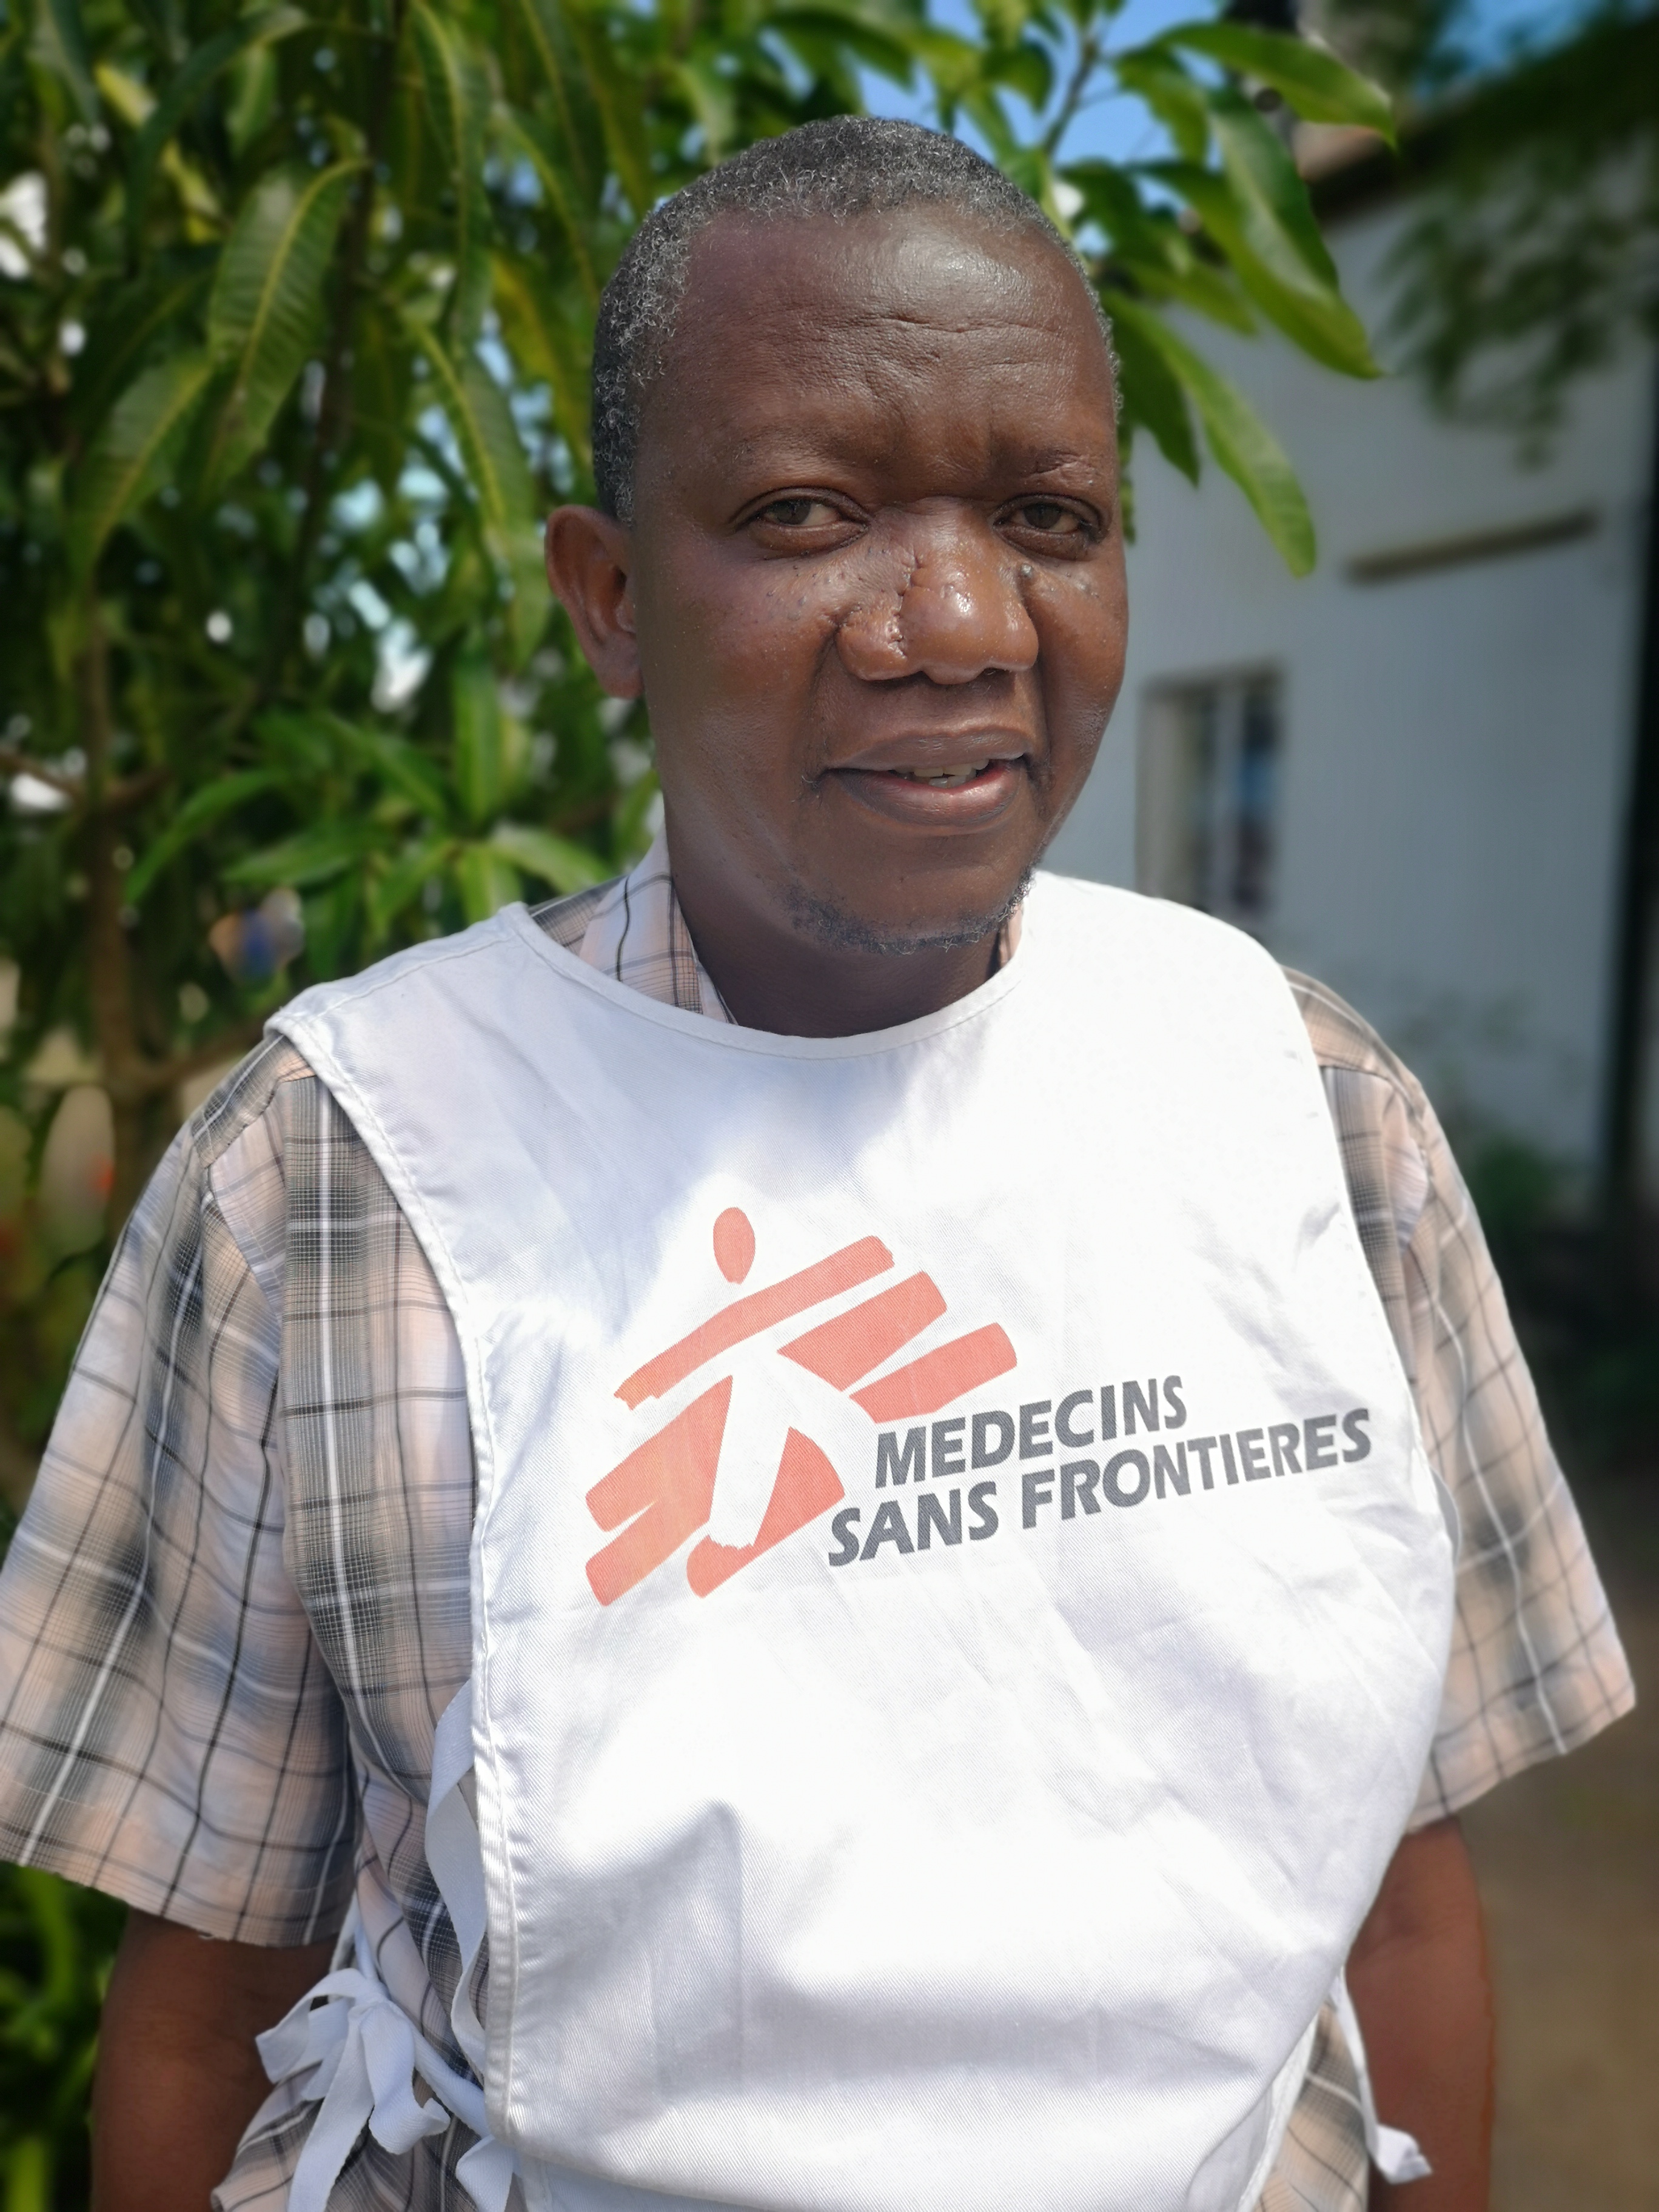 Labana Steven is an MSF Logistician and Community Health Worker in Malawi